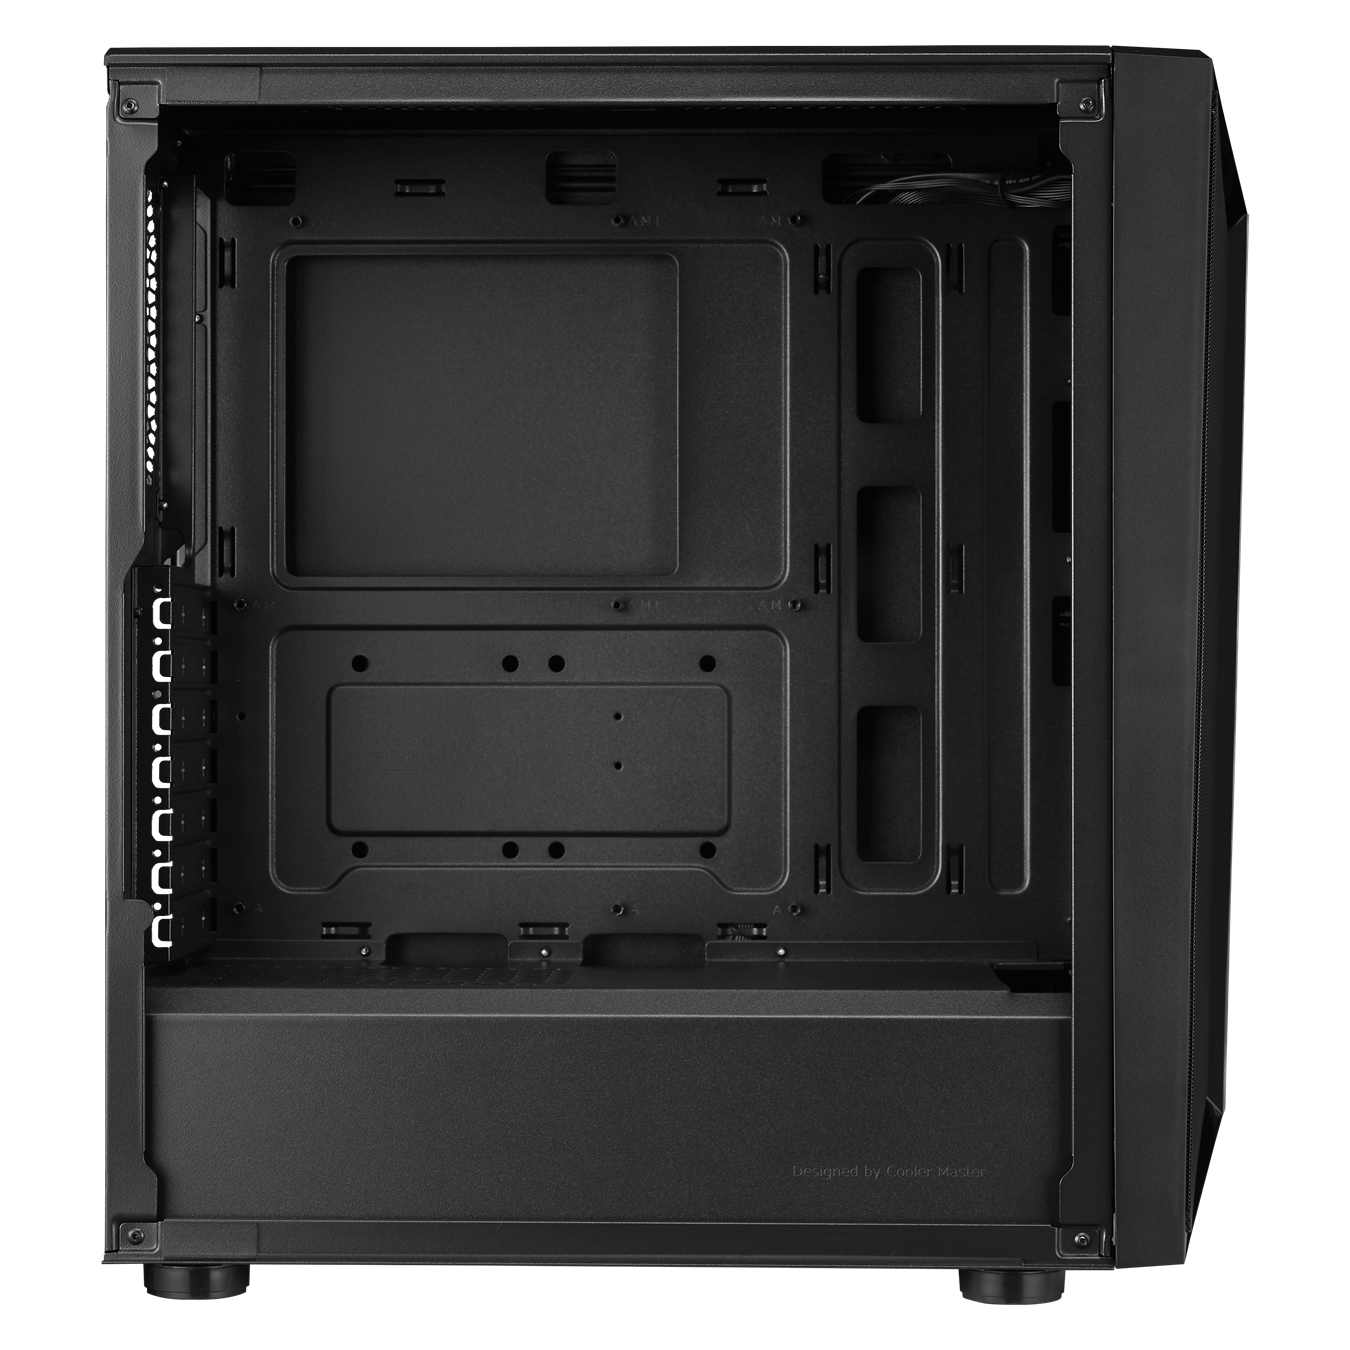 CMP 510 Mid Tower PC Case - Support for up to a 350mm graphics card, a 162mm CPU cooler, and multiple fans/radiators locations provides room for upgrades to stay ahead of the game.